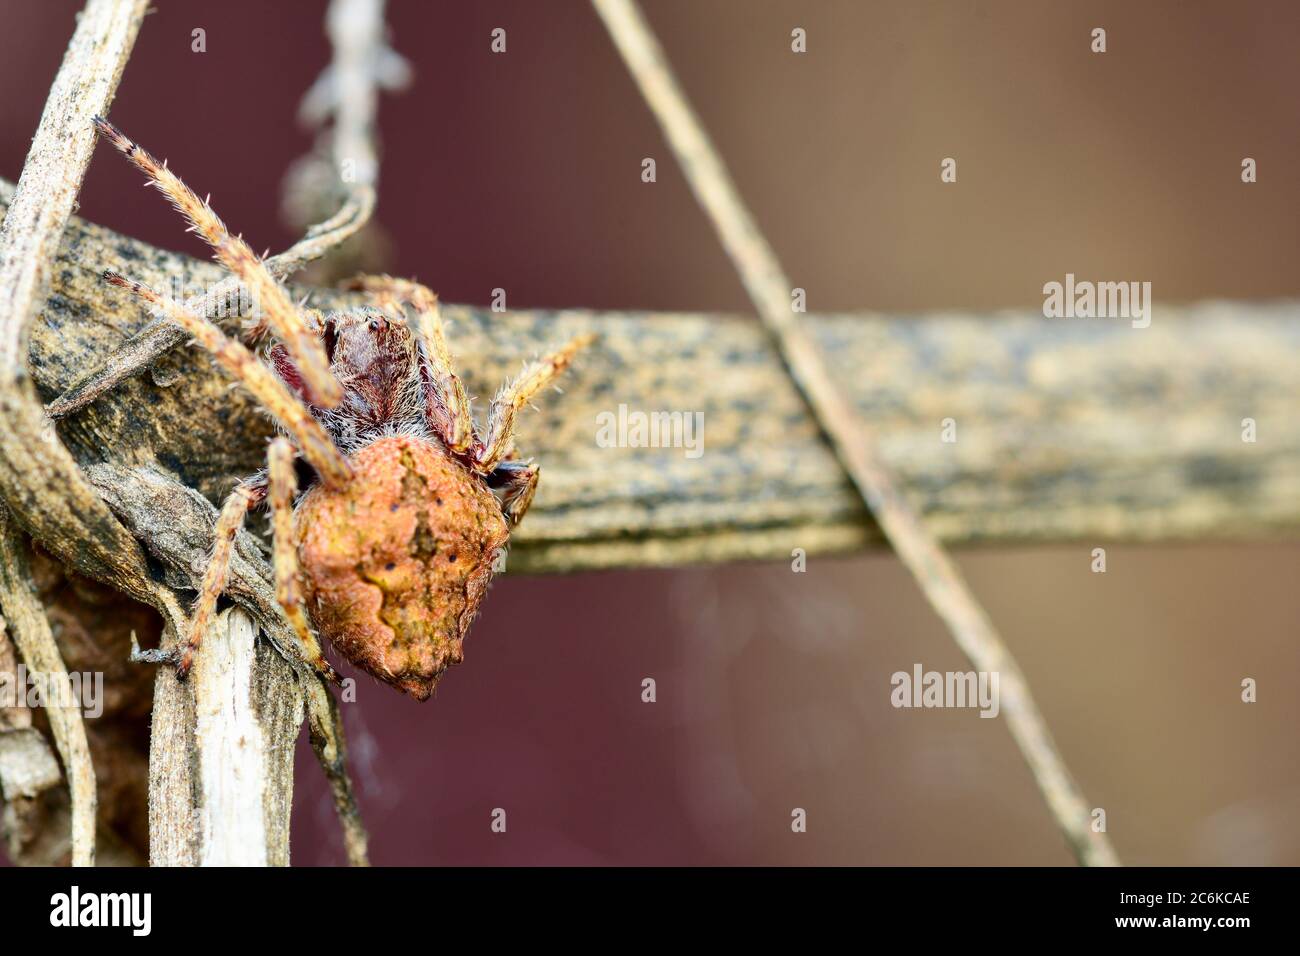 Macro of a Common house spider (Parasteatoda tepidariorum). This is a generic term for different spiders commonly found around human dwellings Stock Photo